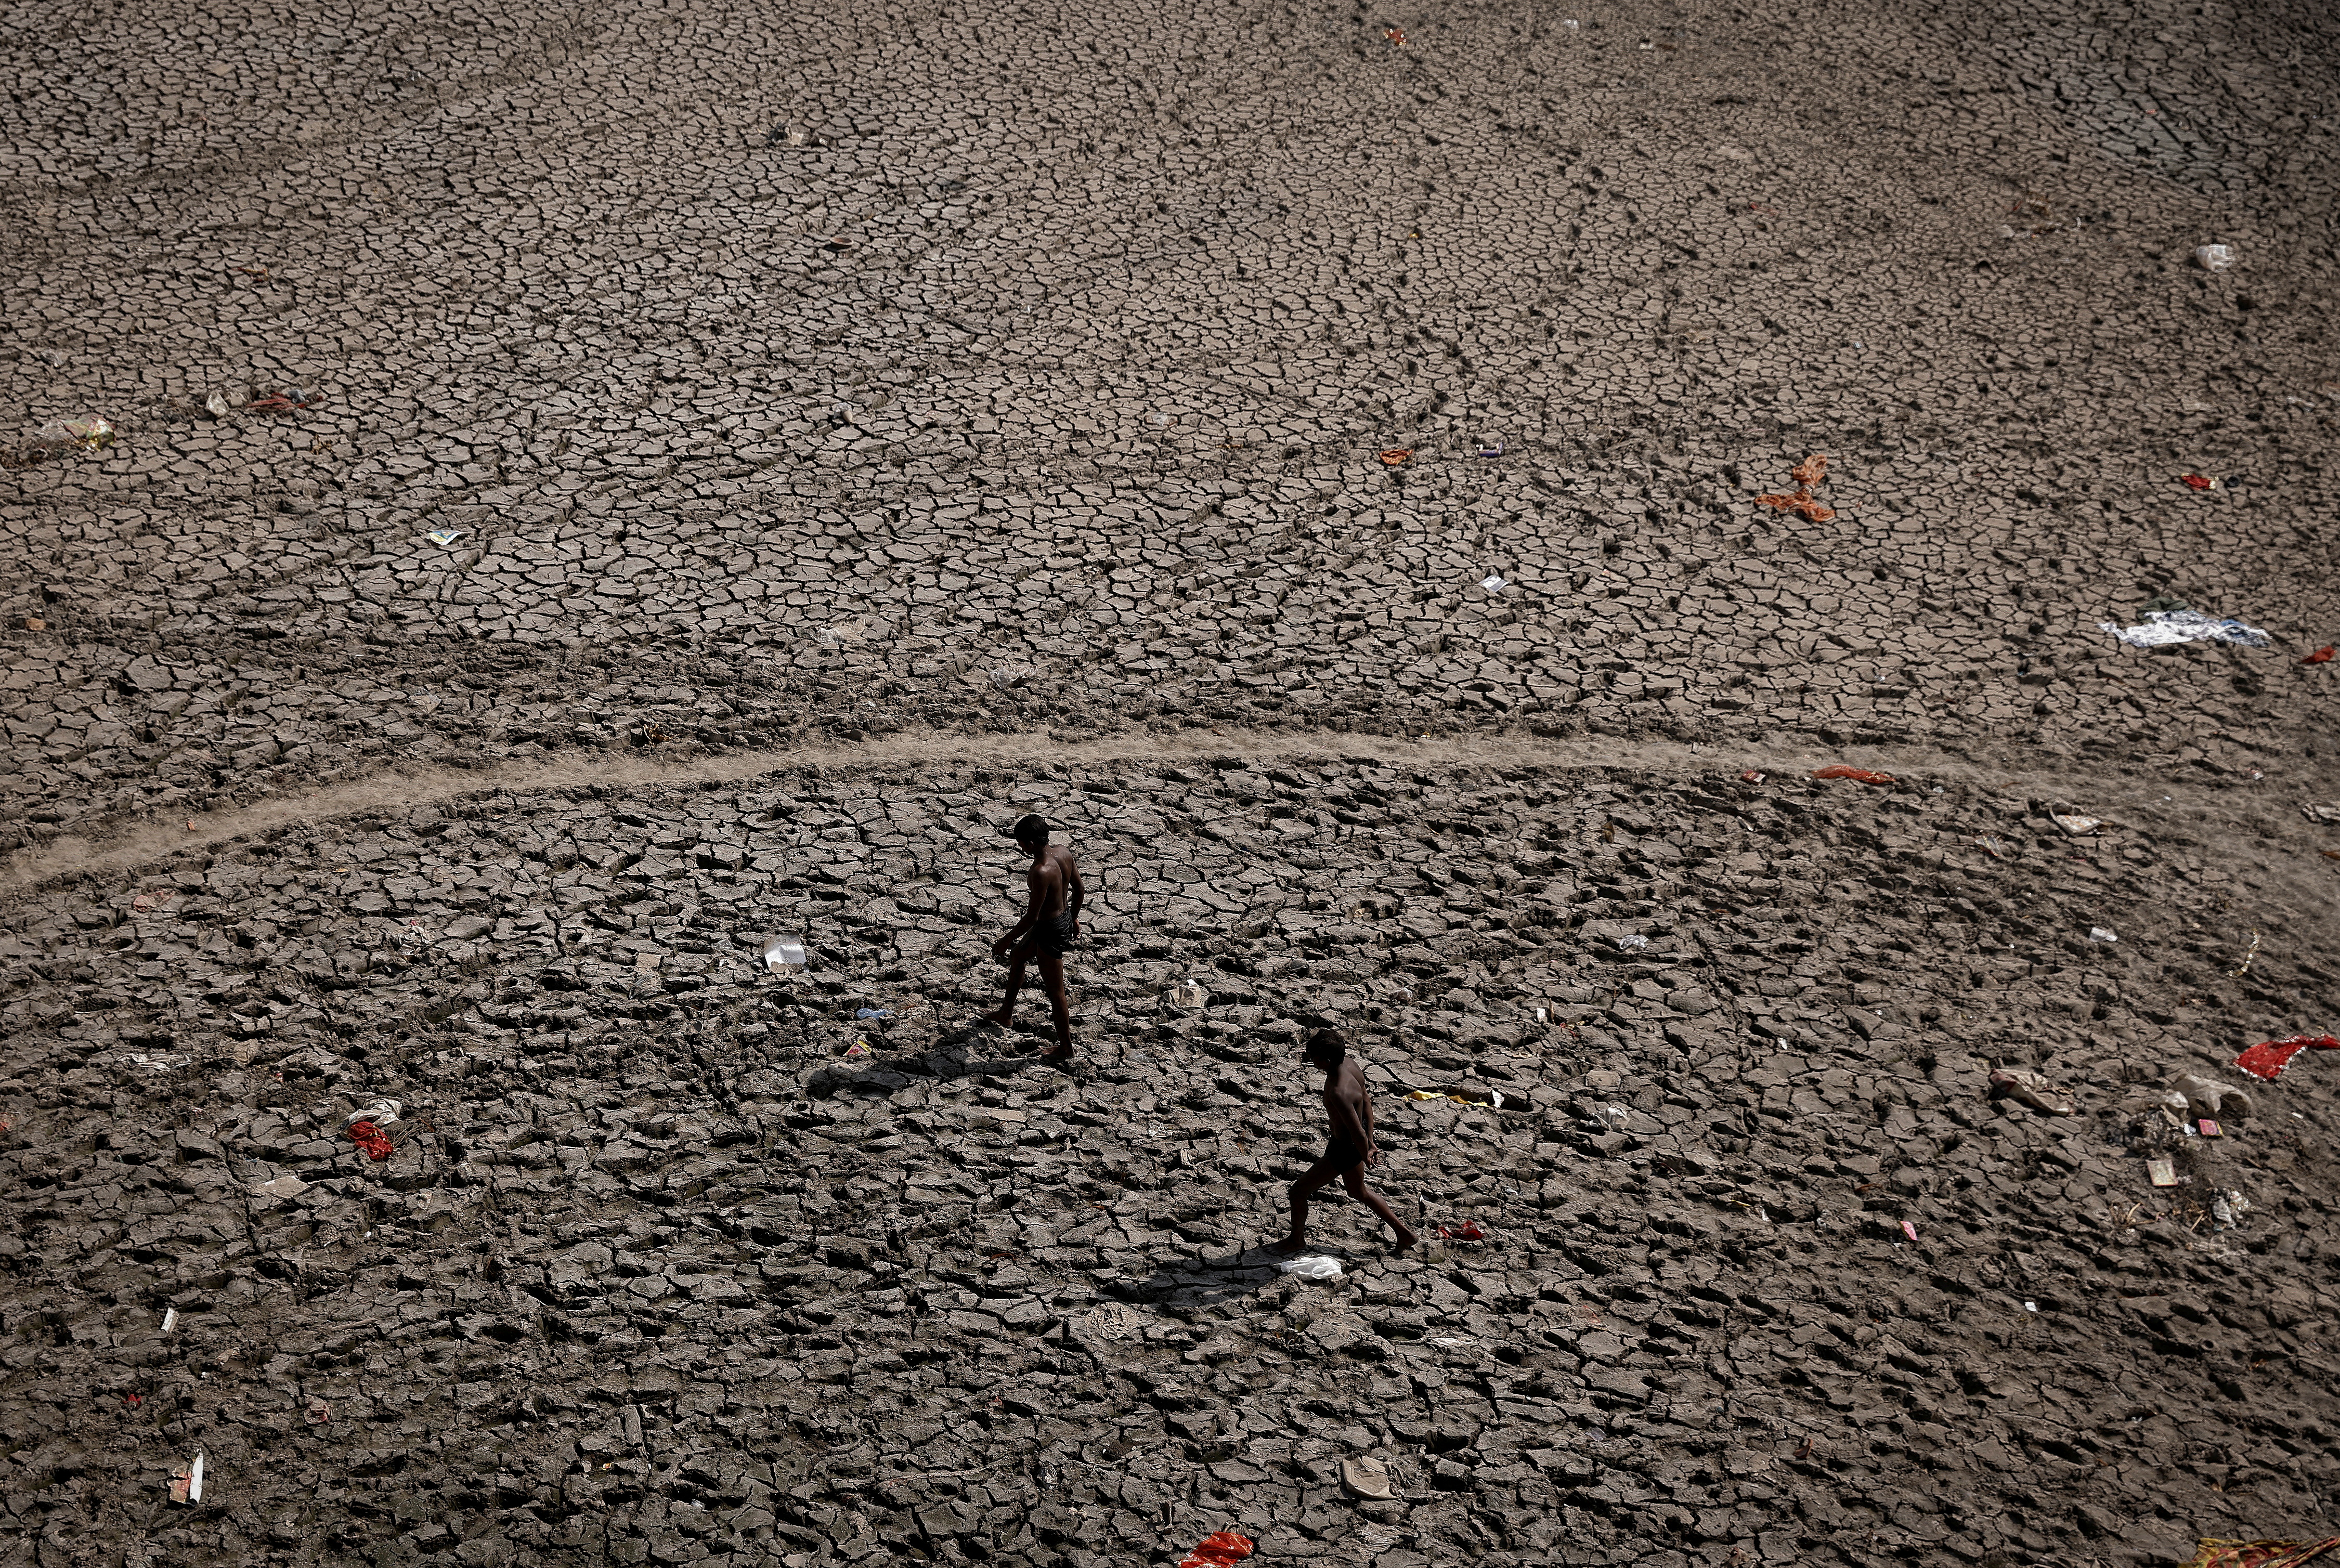 Men walk through an almost dry river bed of Yamuna after searching for recyclable material on a hot summer day in New Delhi